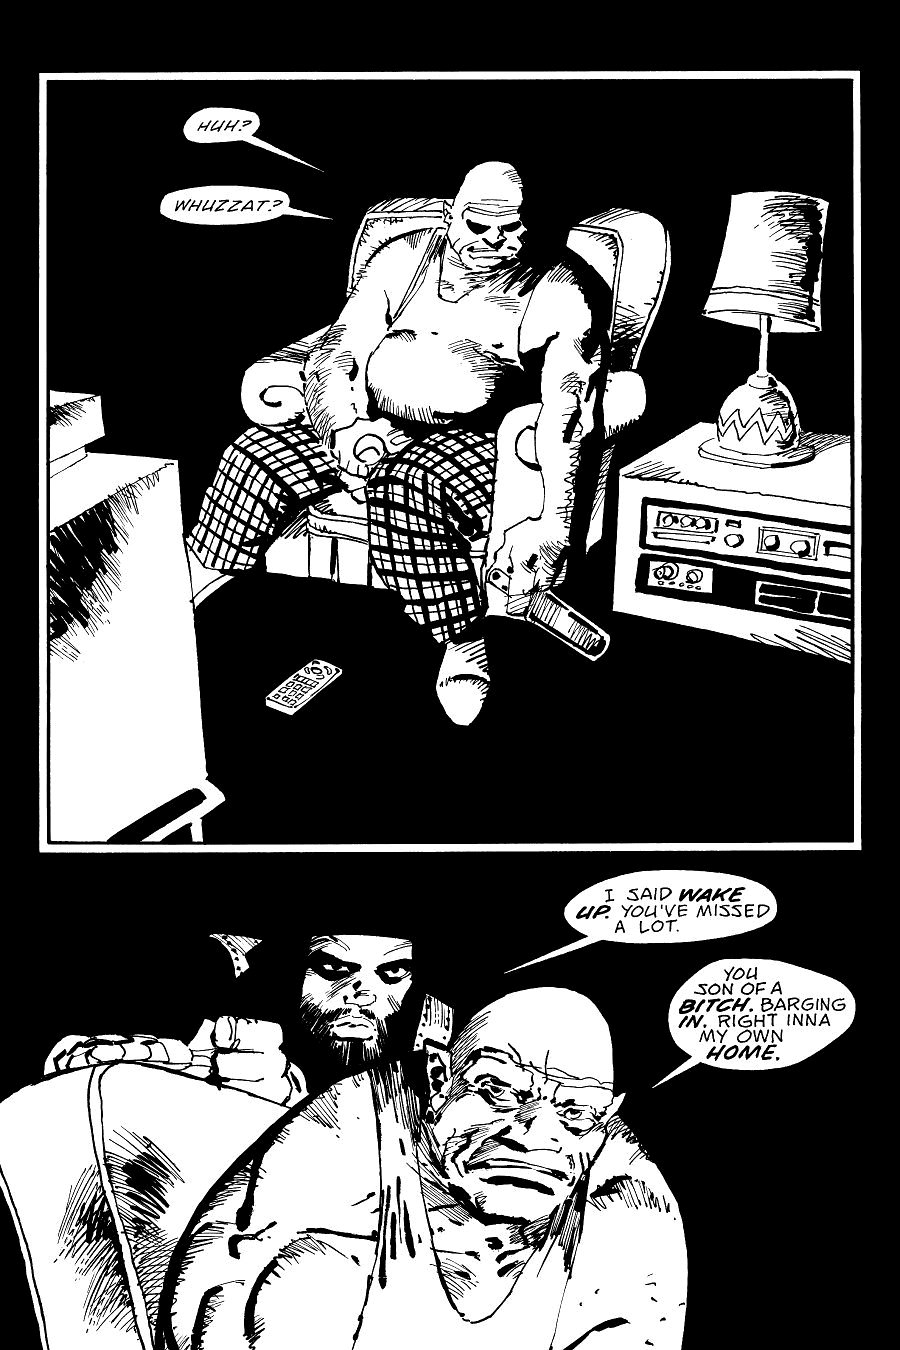 page 242 of sin city 7 hell and back